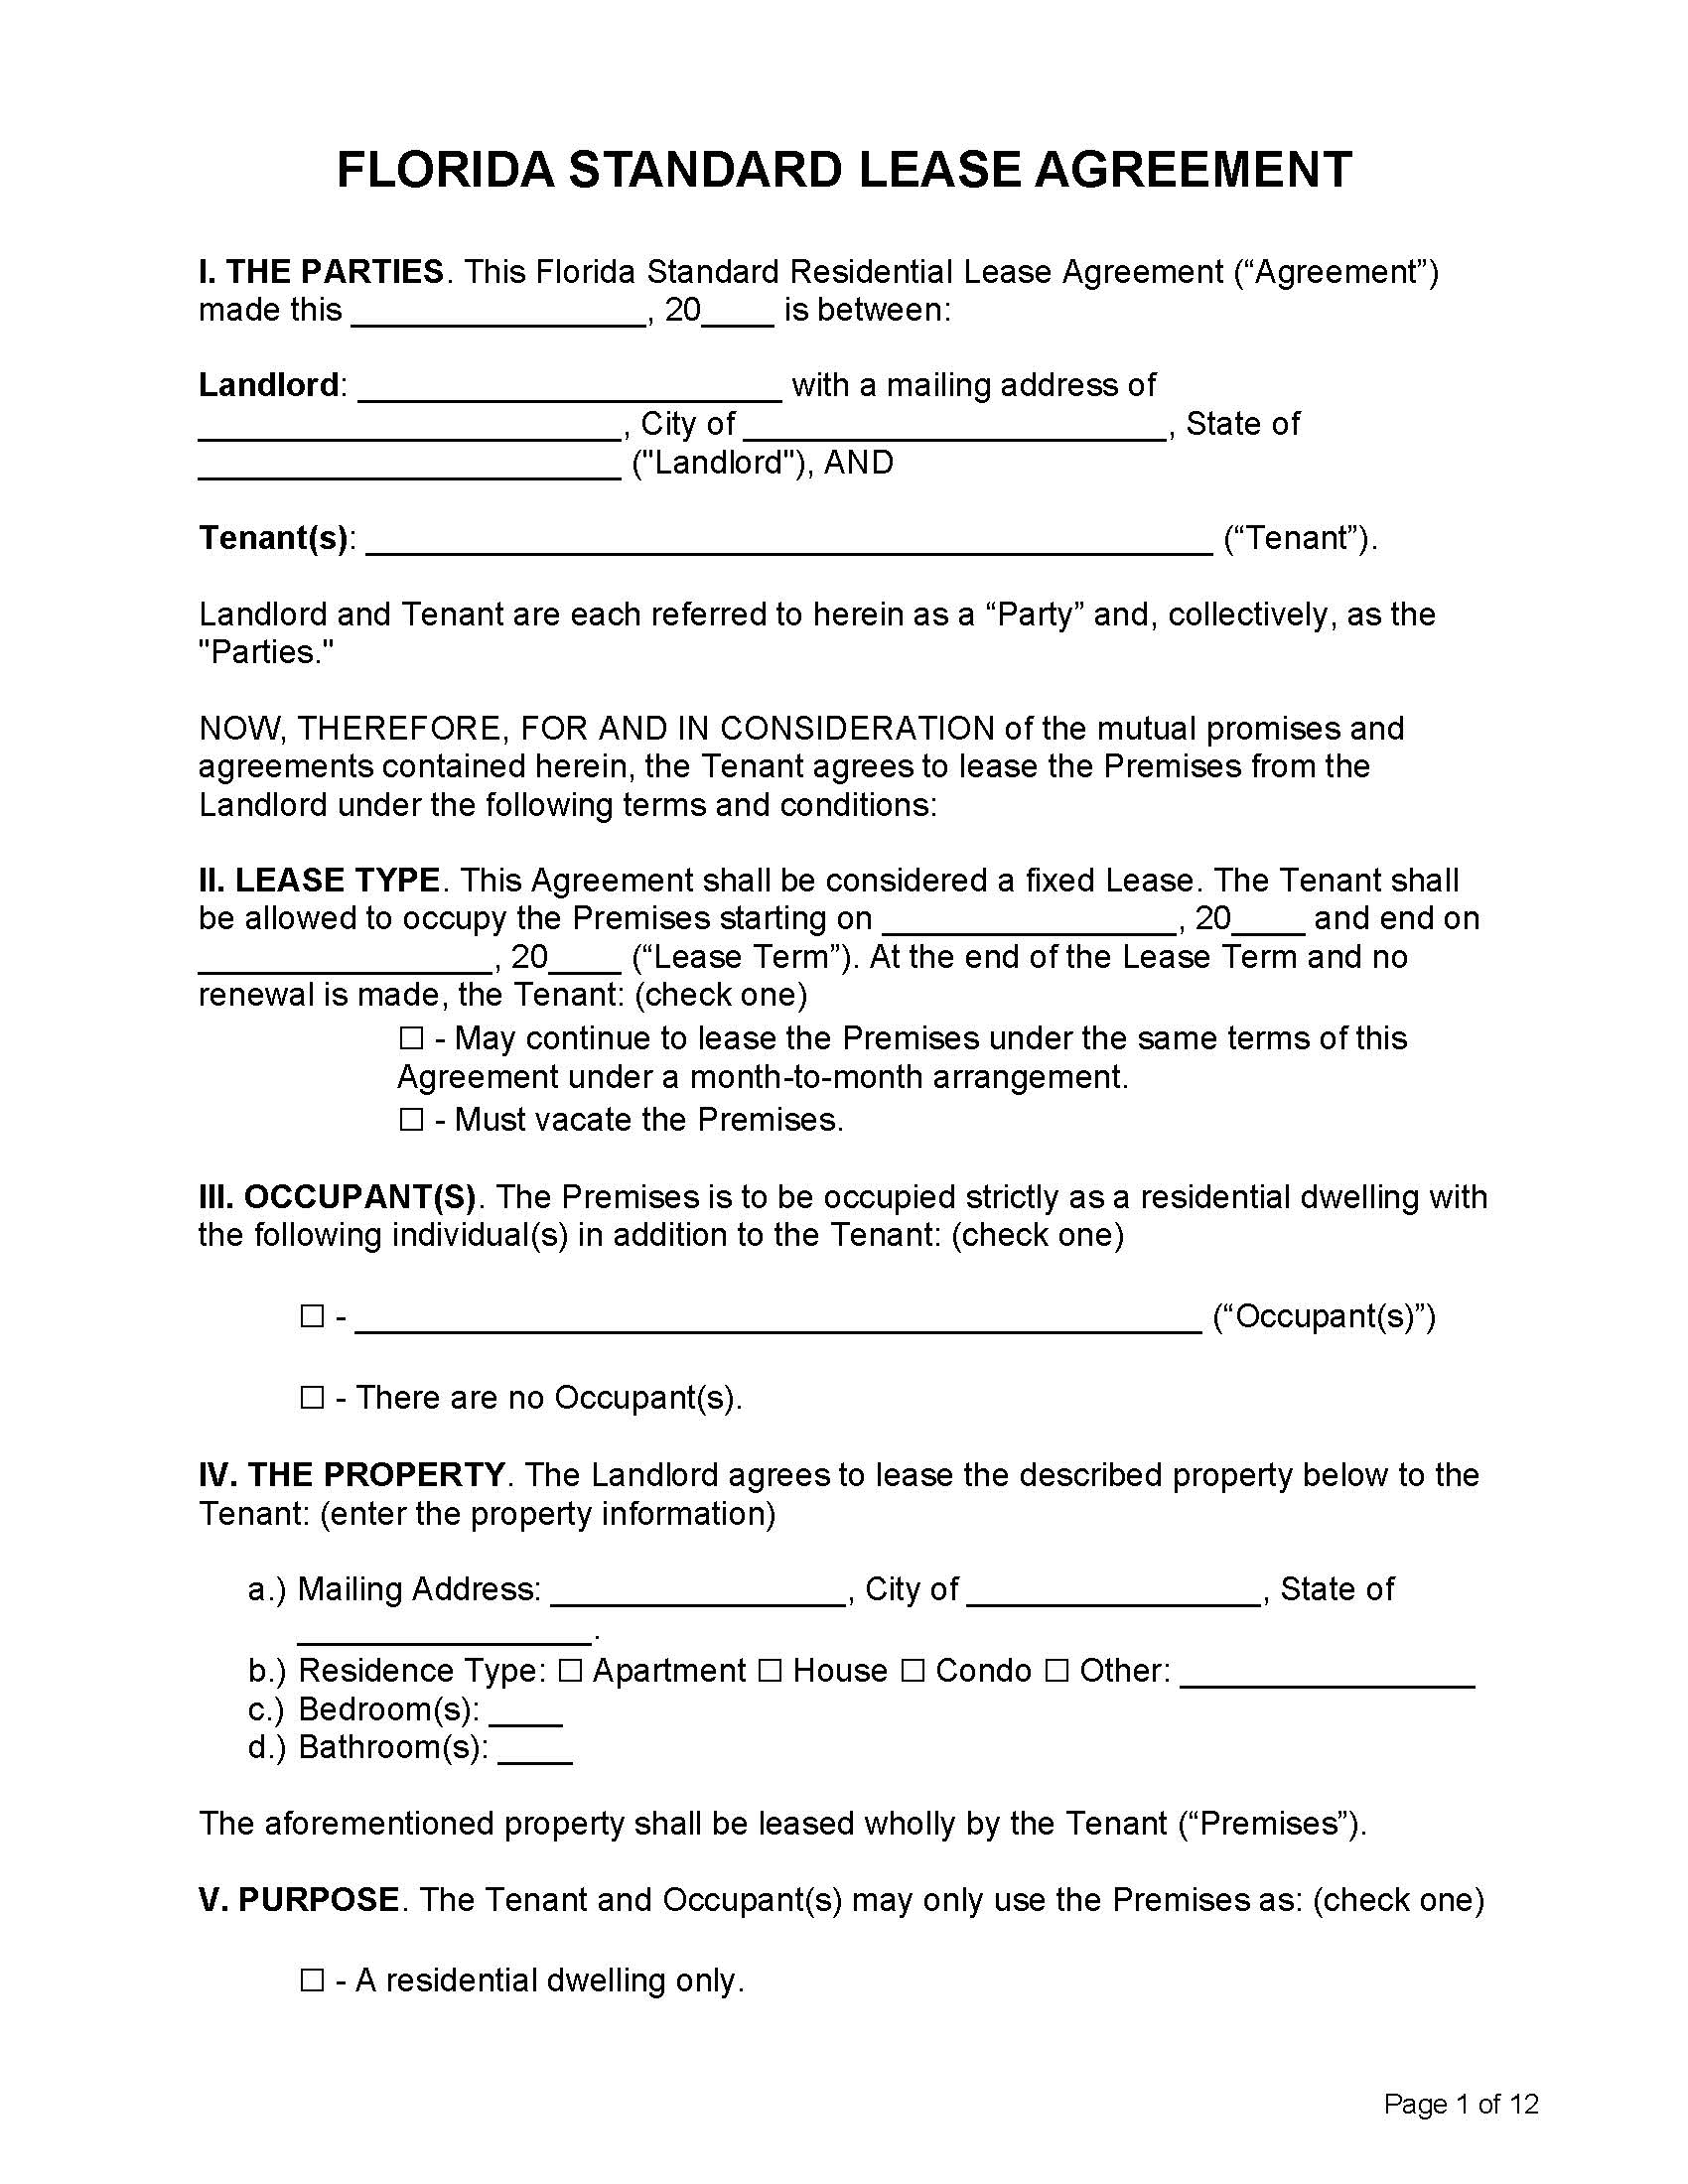 Florida Standard Residential Lease Agreement Form 